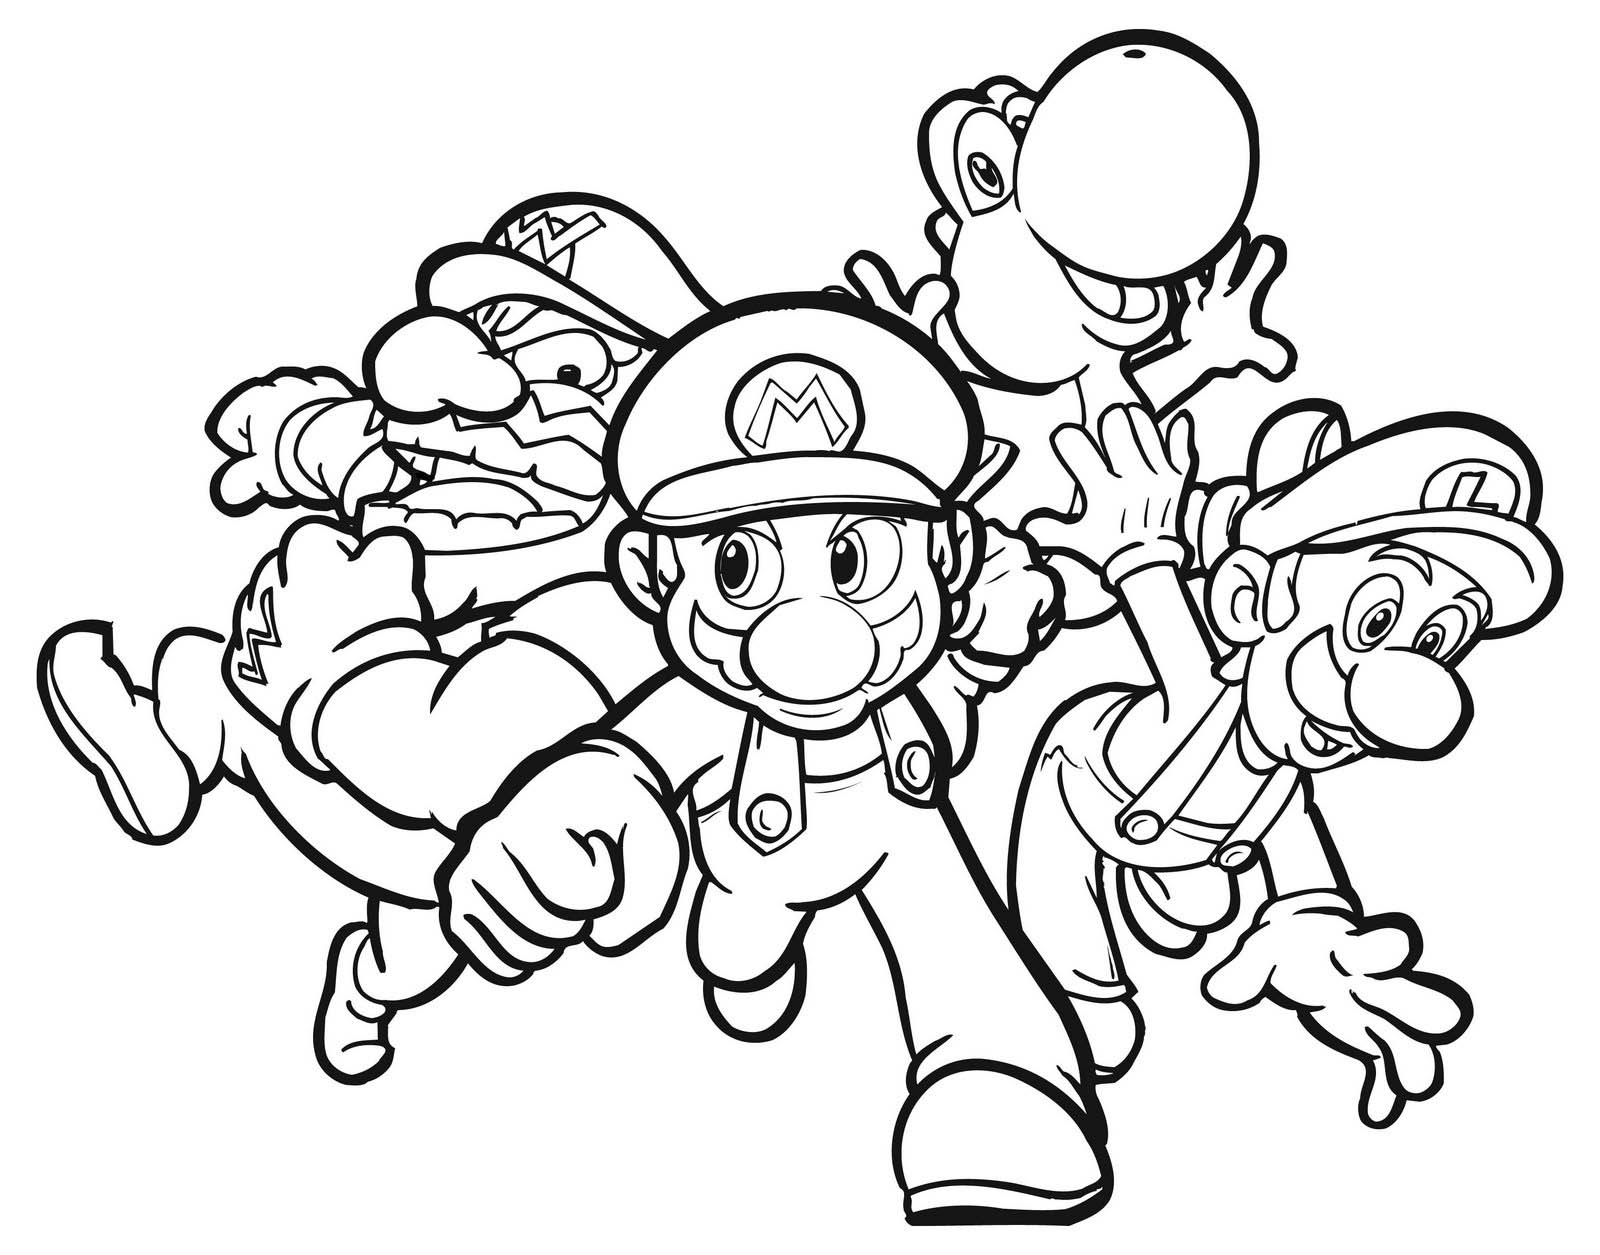 Video Games Archives - Best Coloring Pages For Kids